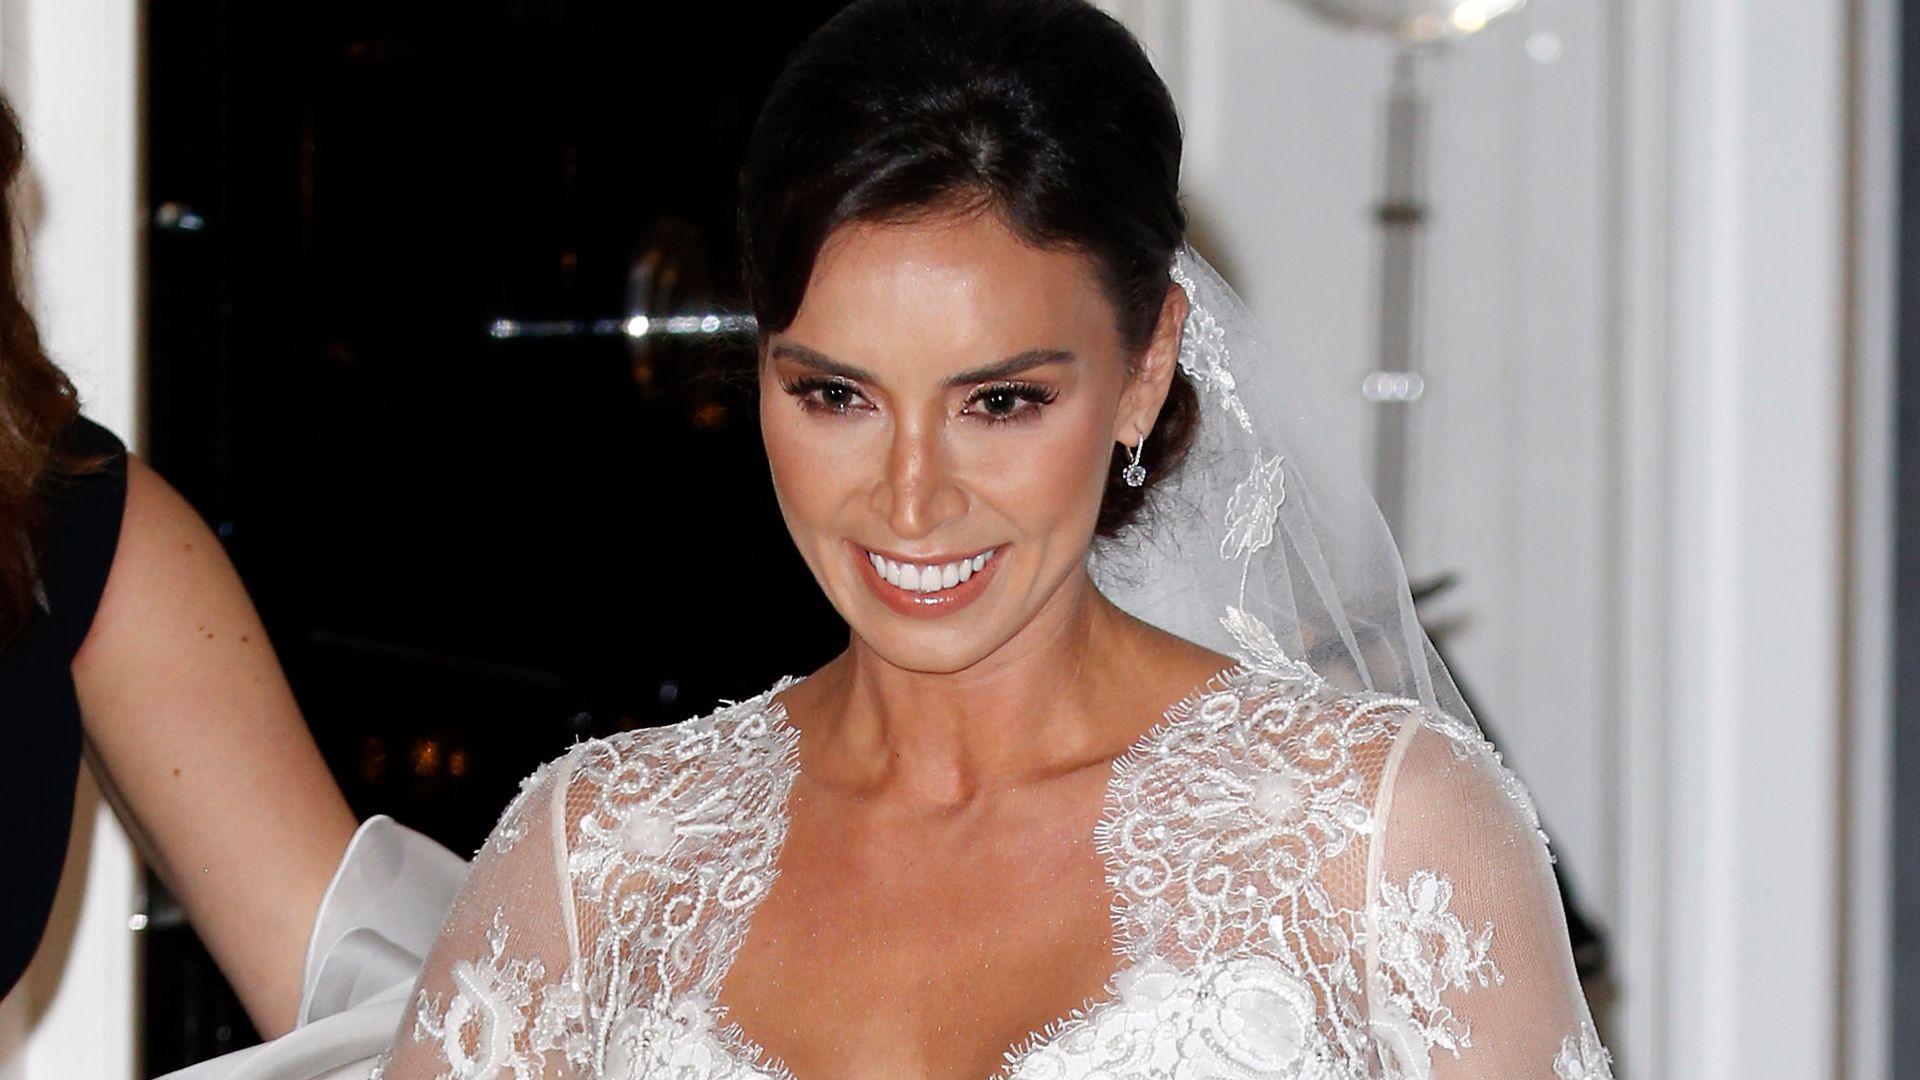 Christine Lampard's lookalike mother-of-the-bride is luscious in lace in unseen wedding photo